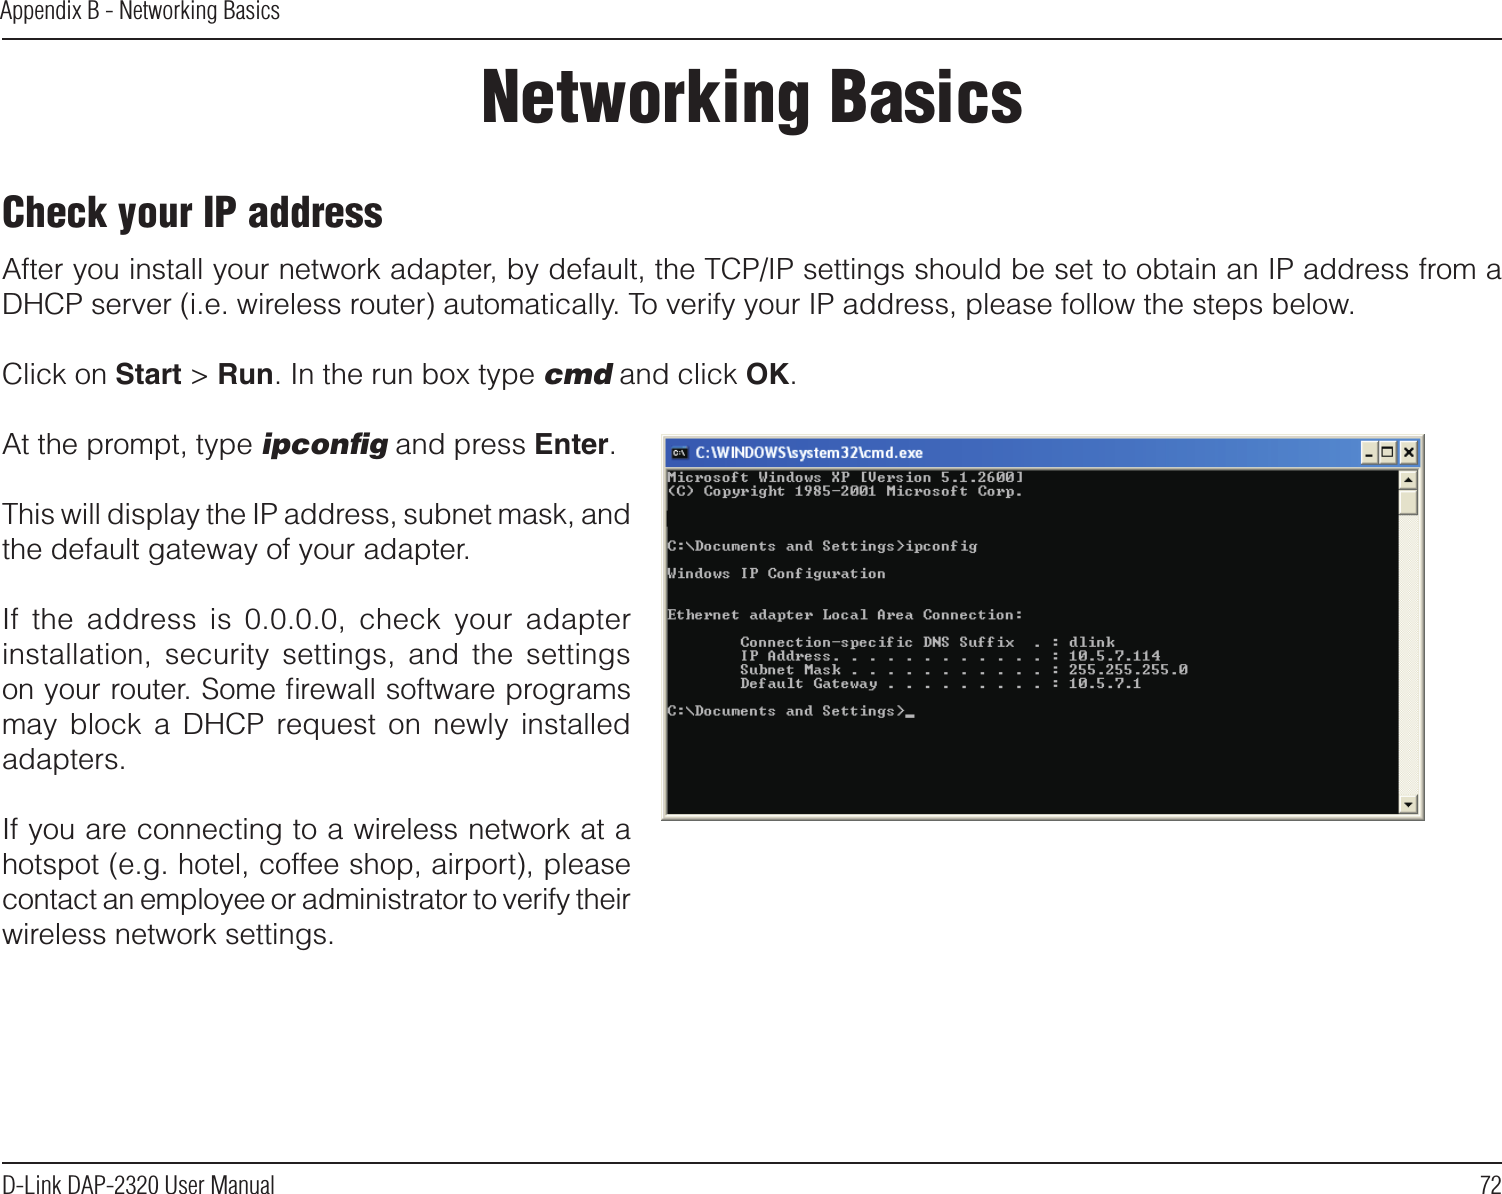 72D-Link DAP-2320 User ManualAppendix B - Networking BasicsNetworking BasicsCheck your IP addressAfter you install your network adapter, by default, the TCP/IP settings should be set to obtain an IP address from a DHCP server (i.e. wireless router) automatically. To verify your IP address, please follow the steps below.Click on Start &gt; Run. In the run box type cmd and click OK.At the prompt, type ipconﬁg and press Enter.This will display the IP address, subnet mask, and the default gateway of your adapter.If  the  address  is  0.0.0.0,  check  your  adapter installation,  security  settings,  and  the  settings on your router. Some ﬁrewall software programs may  block  a  DHCP  request  on  newly  installed adapters. If you are connecting to a wireless network at a hotspot (e.g. hotel, coffee shop, airport), please contact an employee or administrator to verify their wireless network settings.